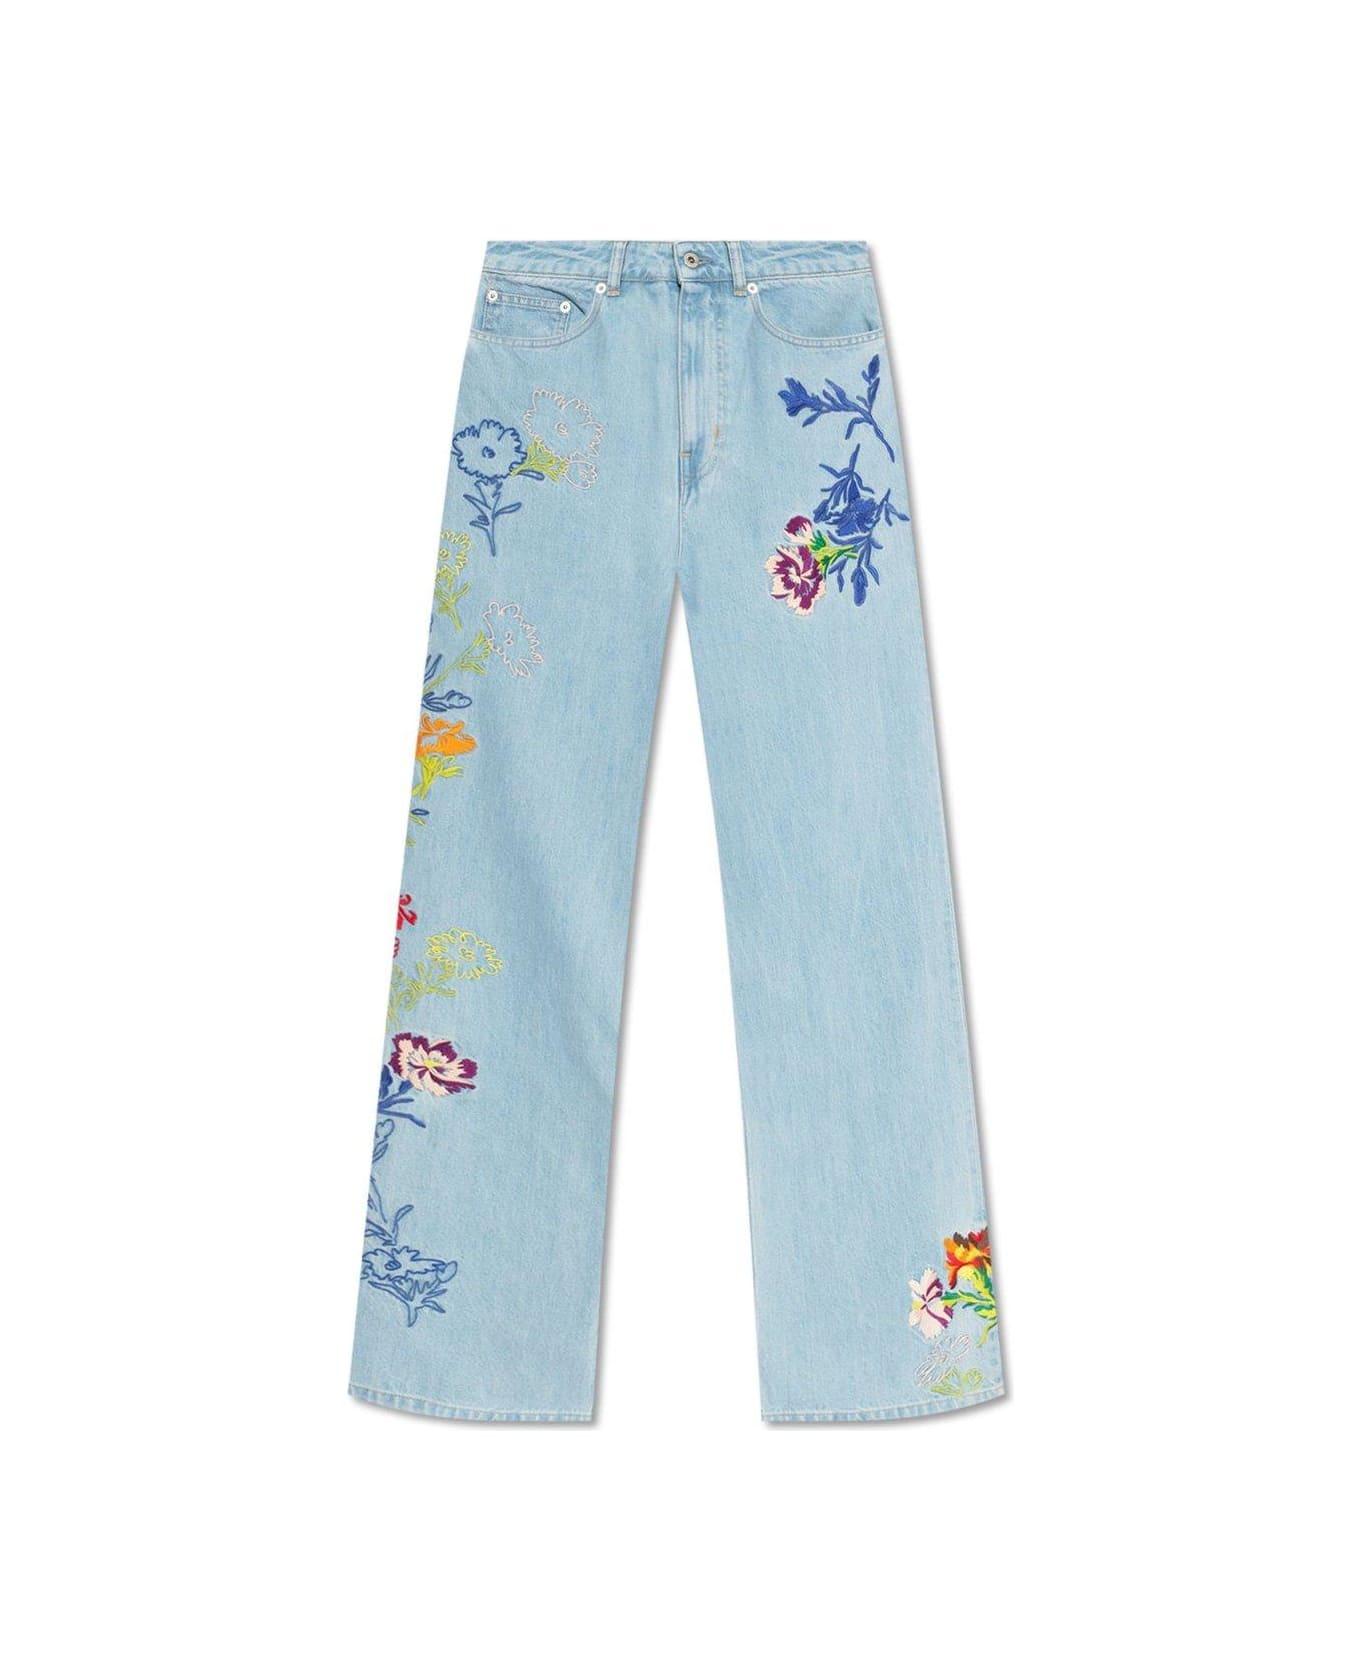 Kenzo Sumire Drawn Flowers High Waist Jeans - STONE WASHED BLUE デニム